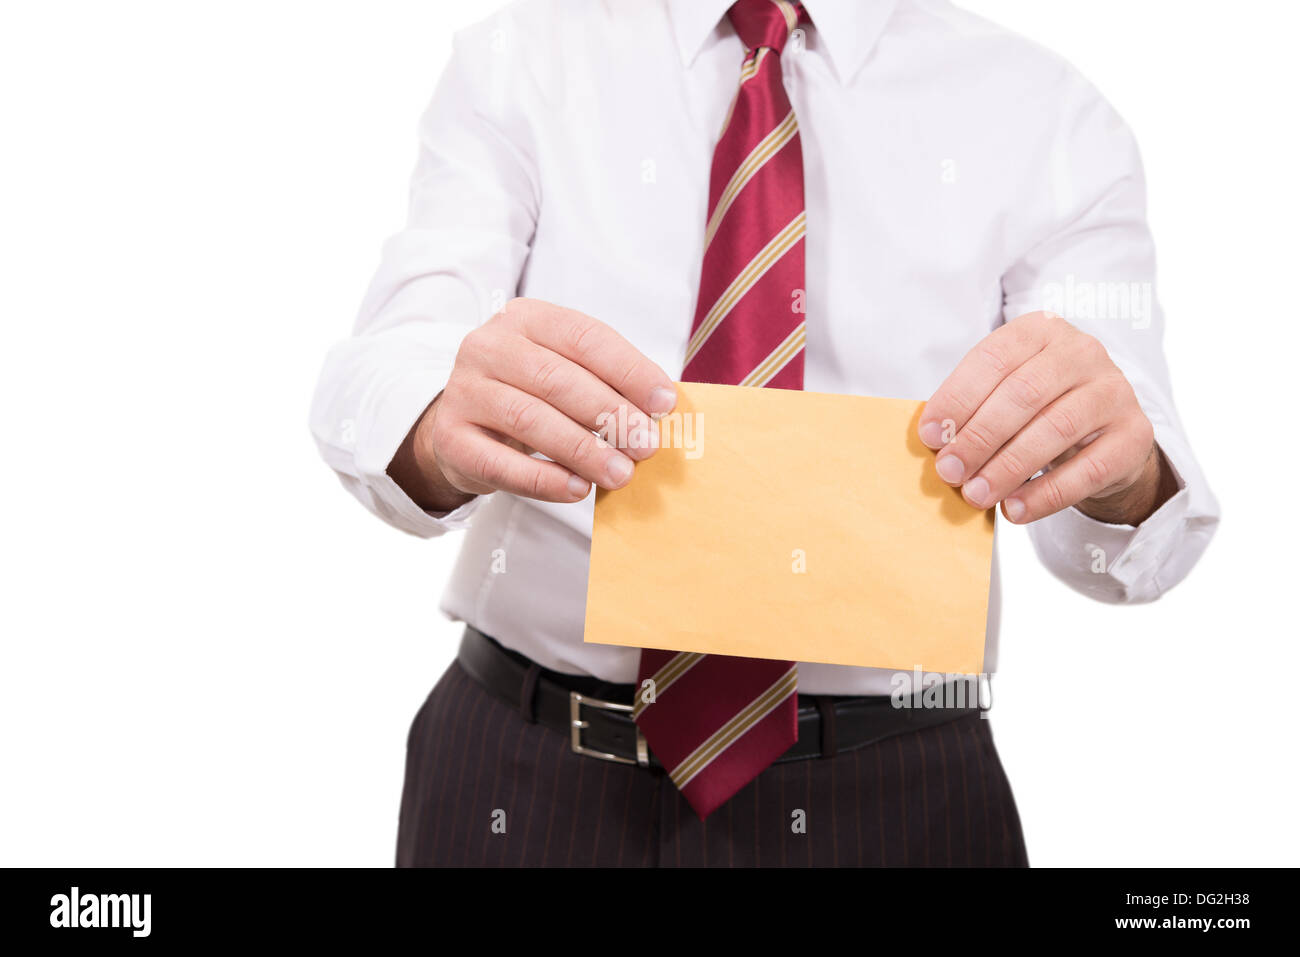 business man hands him an envelope for corruption Stock Photo